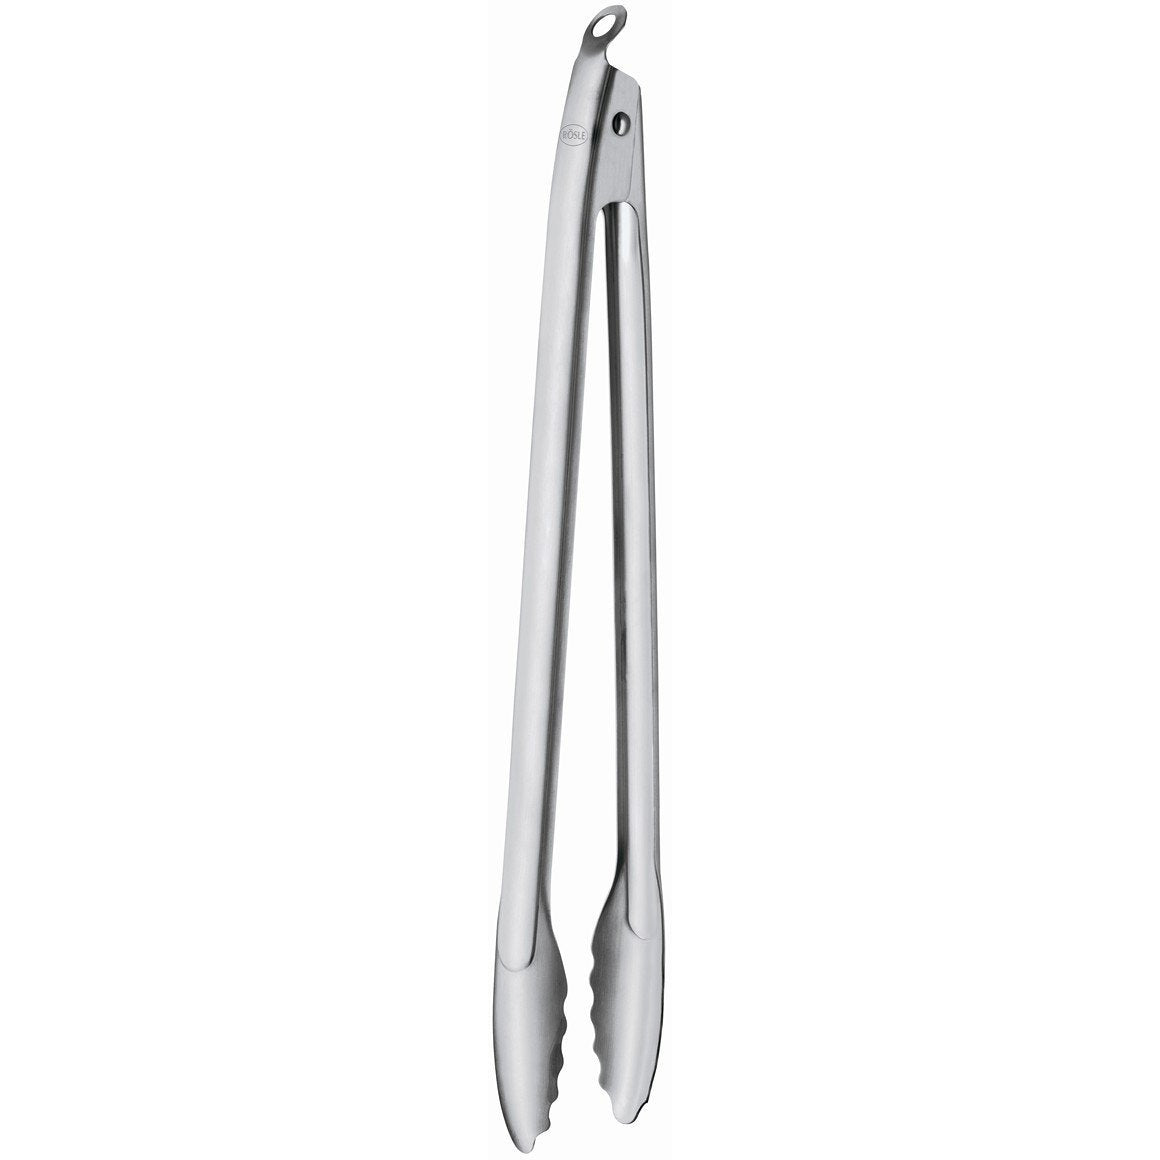 Rosle 18/10 Stainless Steel 16 Inch Locking Grill Tongs